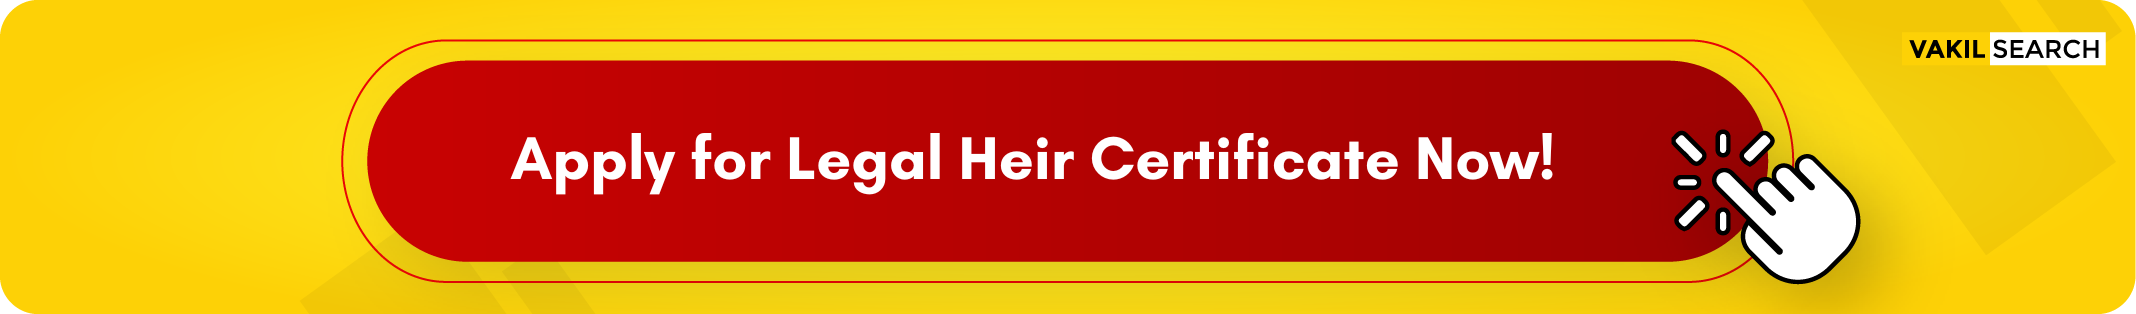 Apply for Legal Heir Certificate Now!